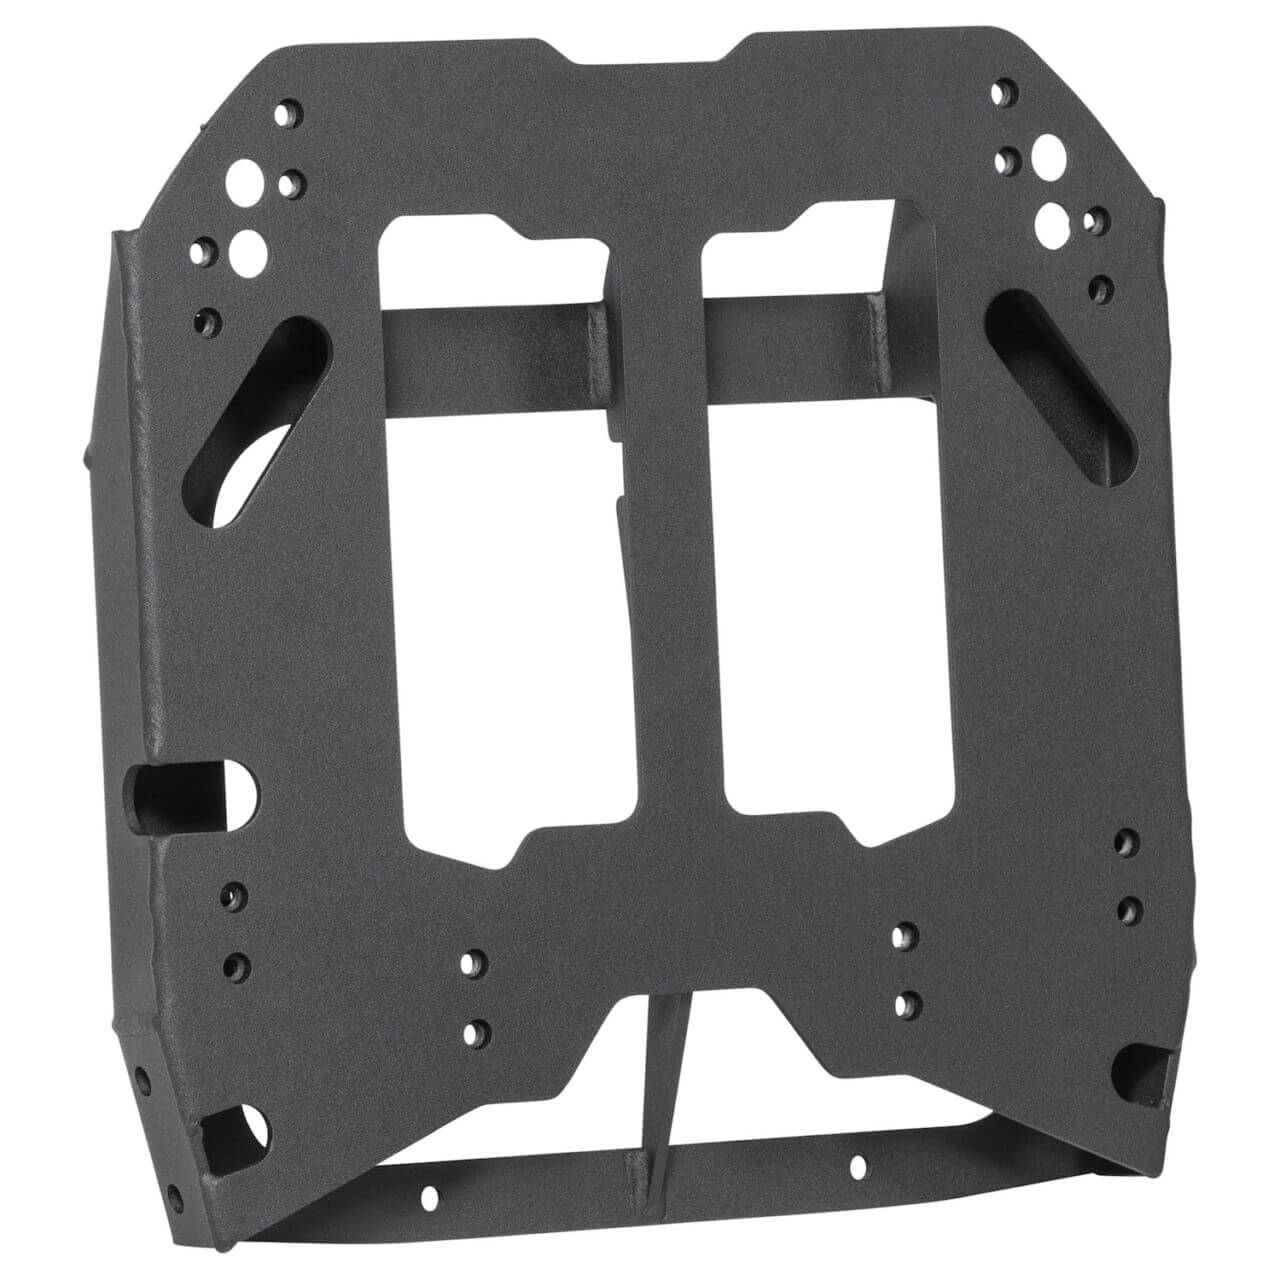 11 4wp factory bronco spare tire relocation bracket